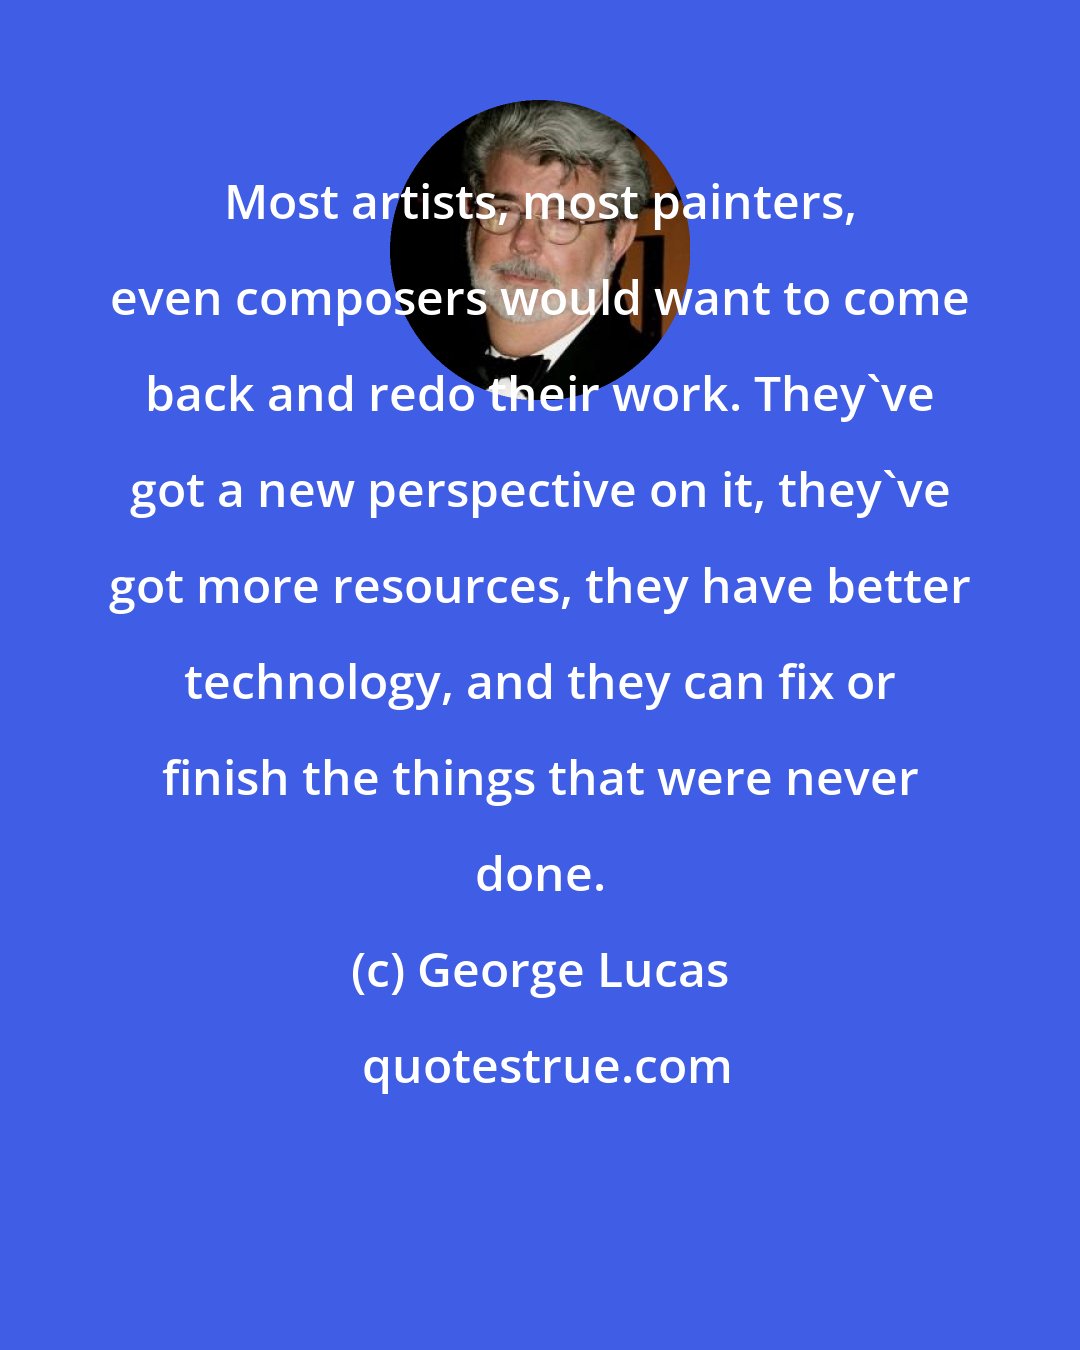 George Lucas: Most artists, most painters, even composers would want to come back and redo their work. They've got a new perspective on it, they've got more resources, they have better technology, and they can fix or finish the things that were never done.